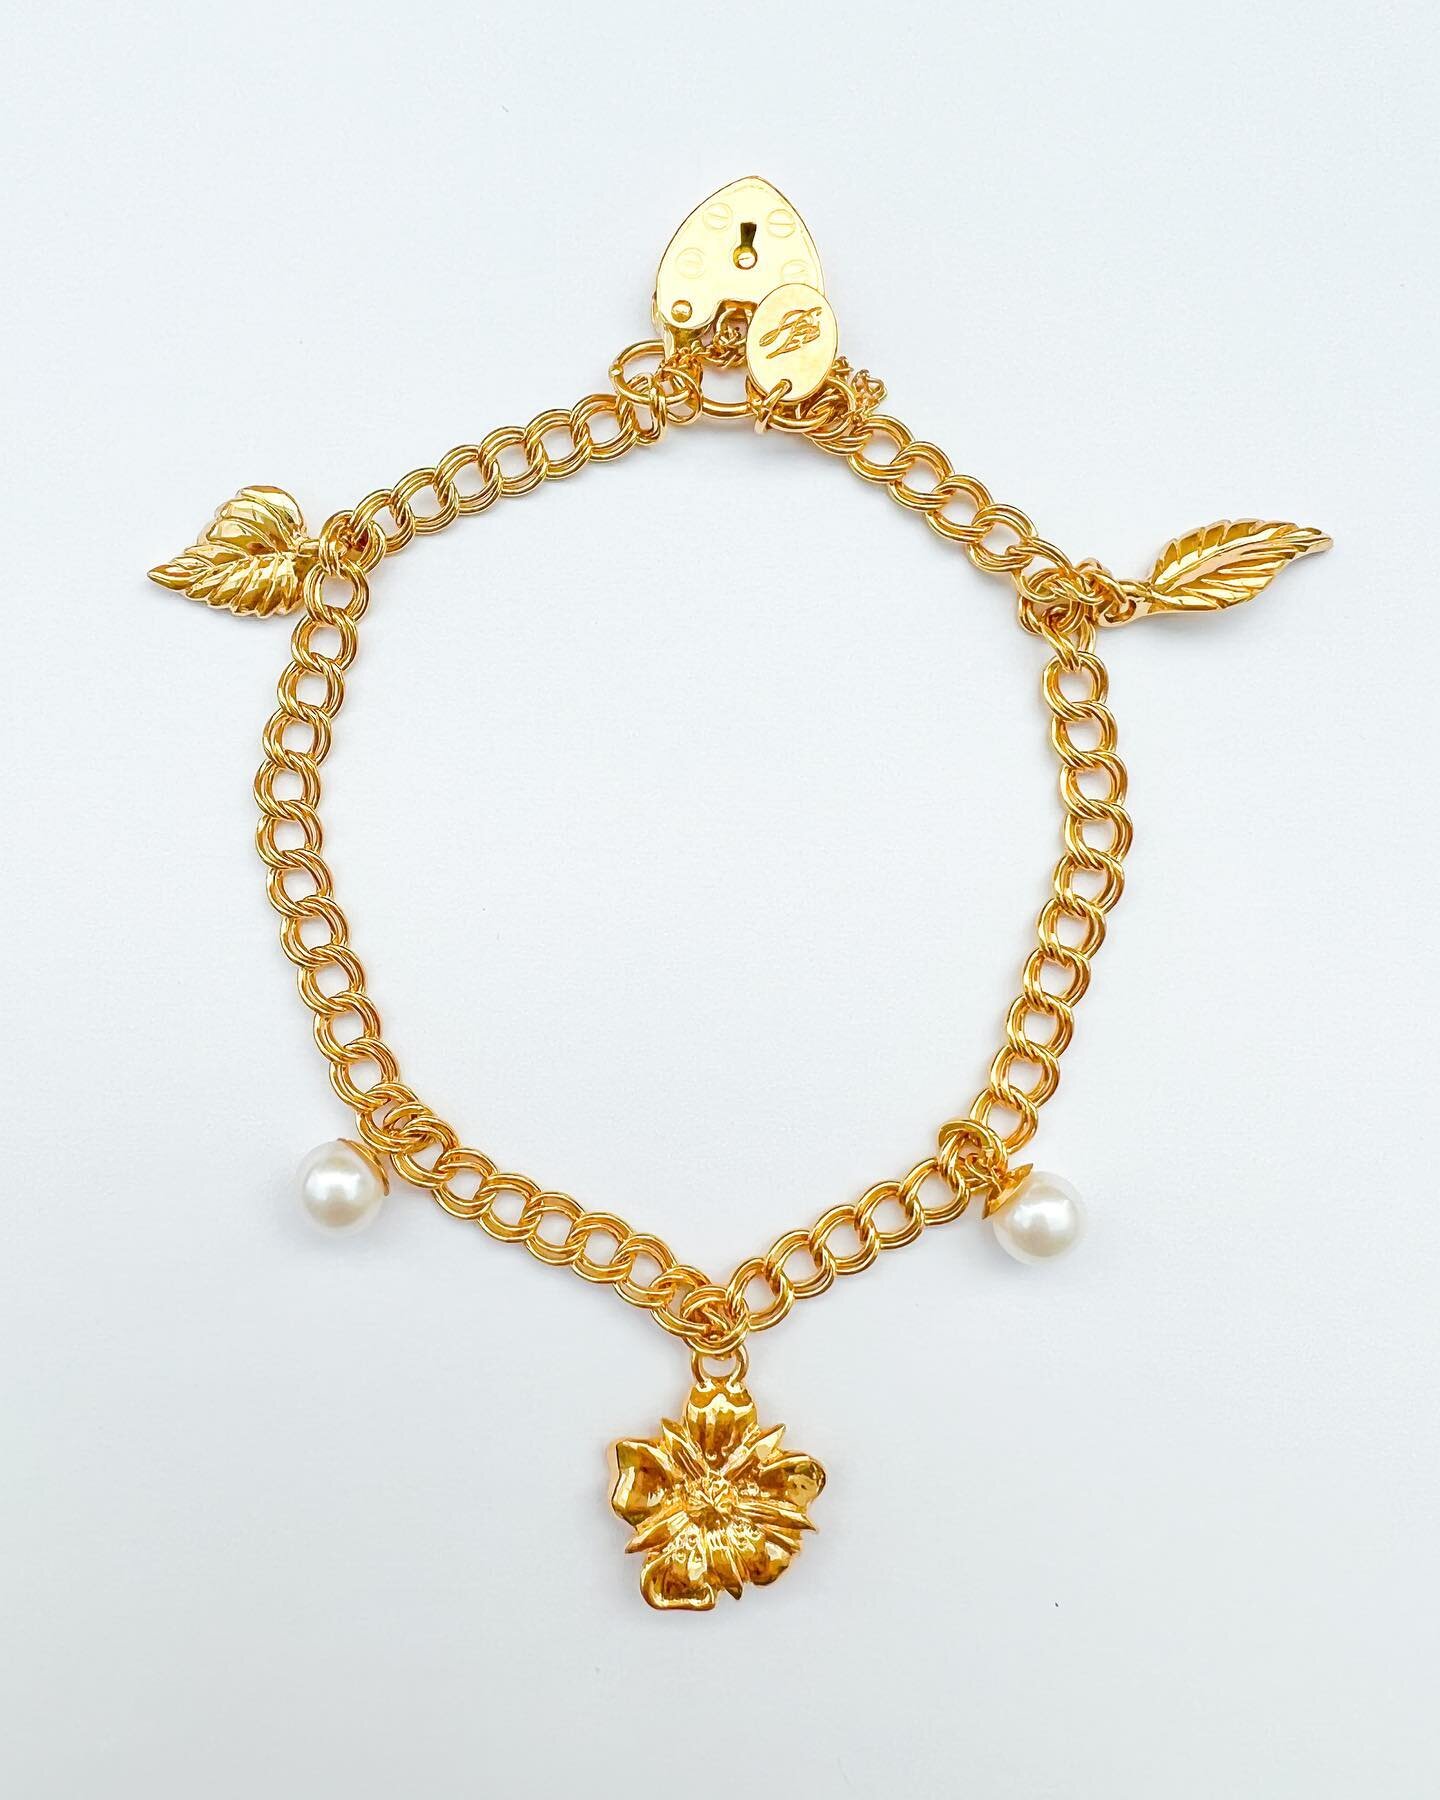 Strawberry flower charm bracelet with fresh water pearls in either gold plated or 9 carat gold. Originally hand-carved in wax (swipe to see wax work), you can see the trace of my hand in every jewel. Order yours now at www.josephinedestael.com #jewel